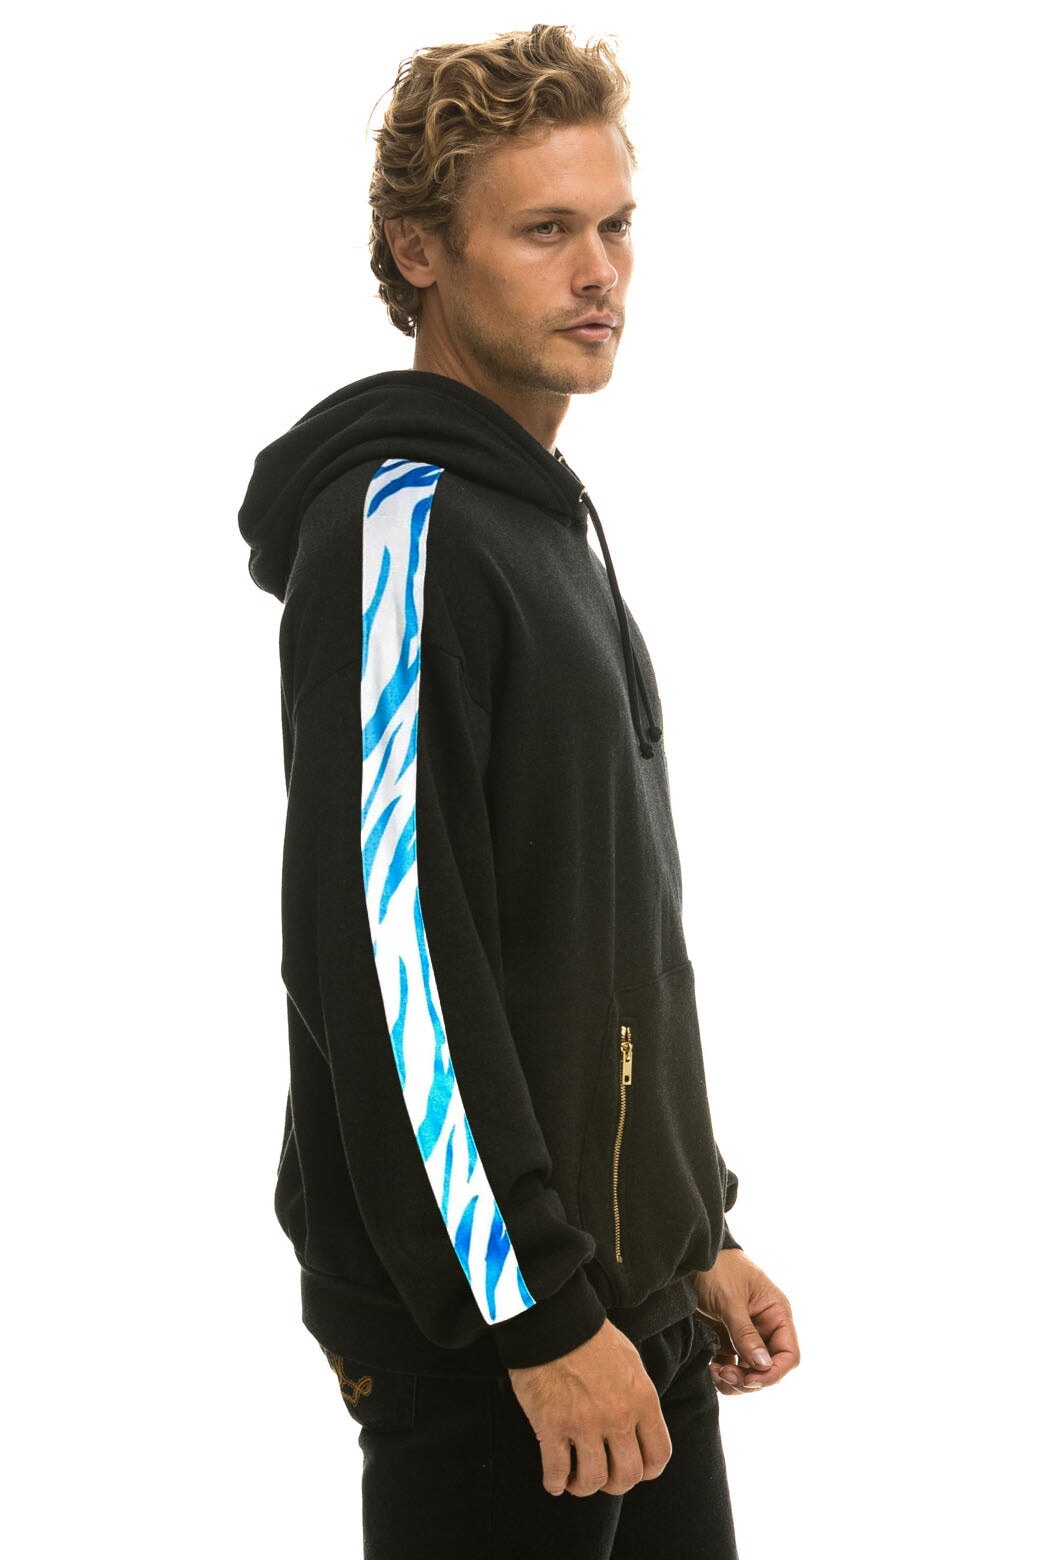 TIGER STRIPE RELAXED PULLOVER HOODIE - BLACK // BLUE TIGER Hoodie Aviator Nation 